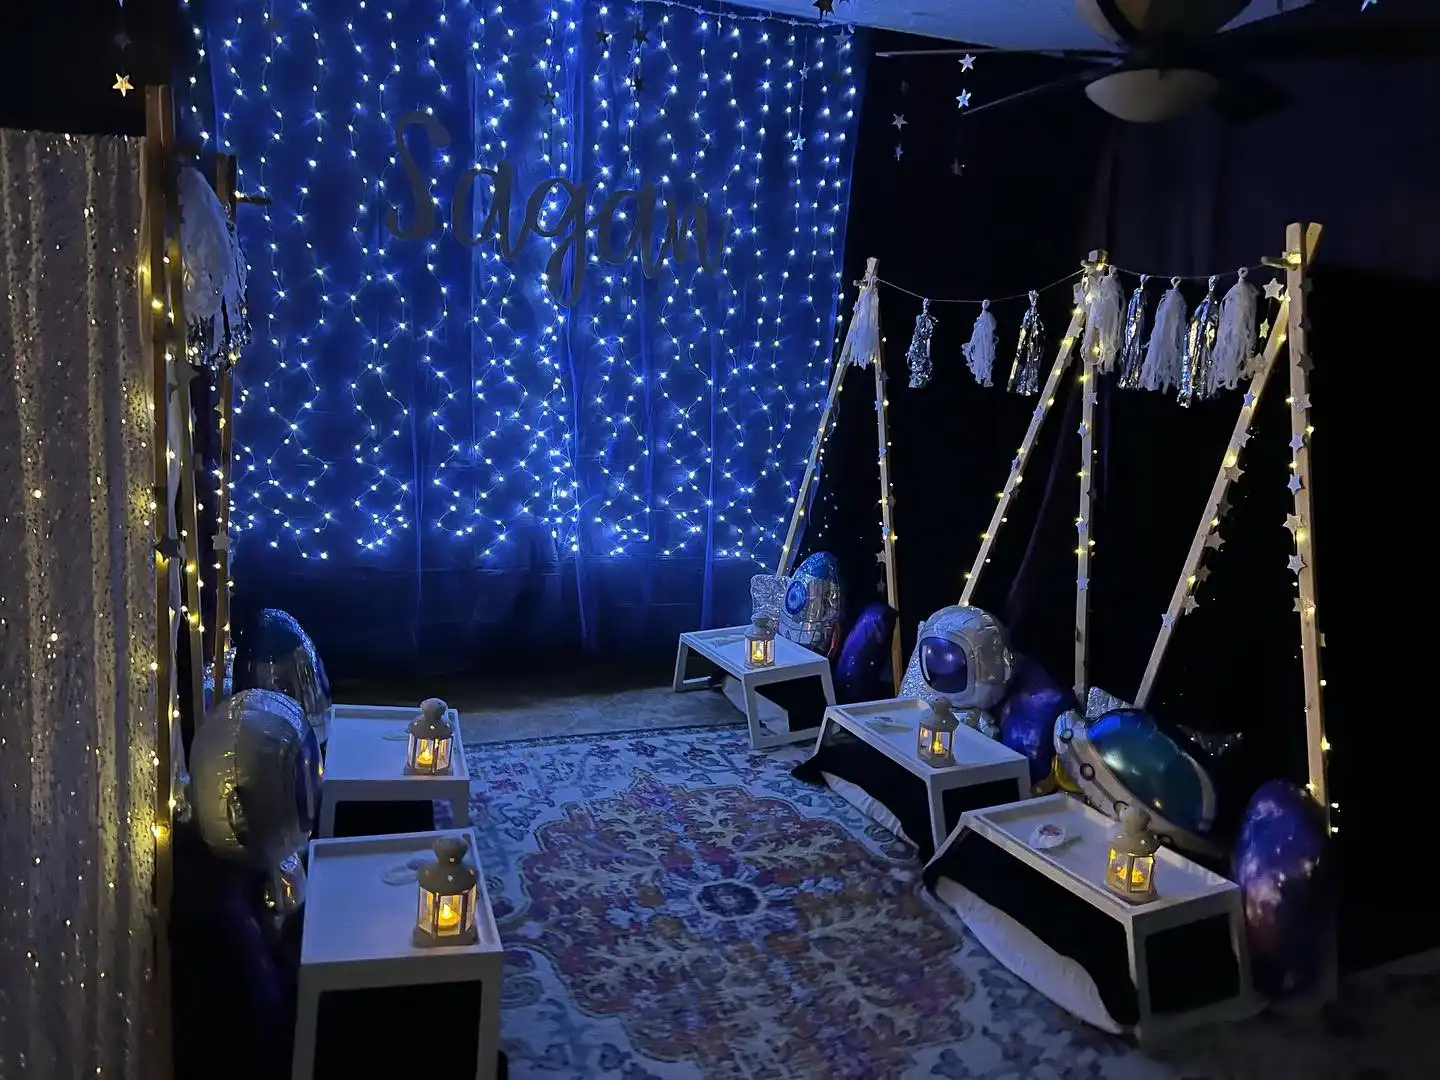 A dimly lit room decorated with a "dream" sign in blue lights, featuring small teepees and celestial-themed cushions on the floor, evoking a magical night.